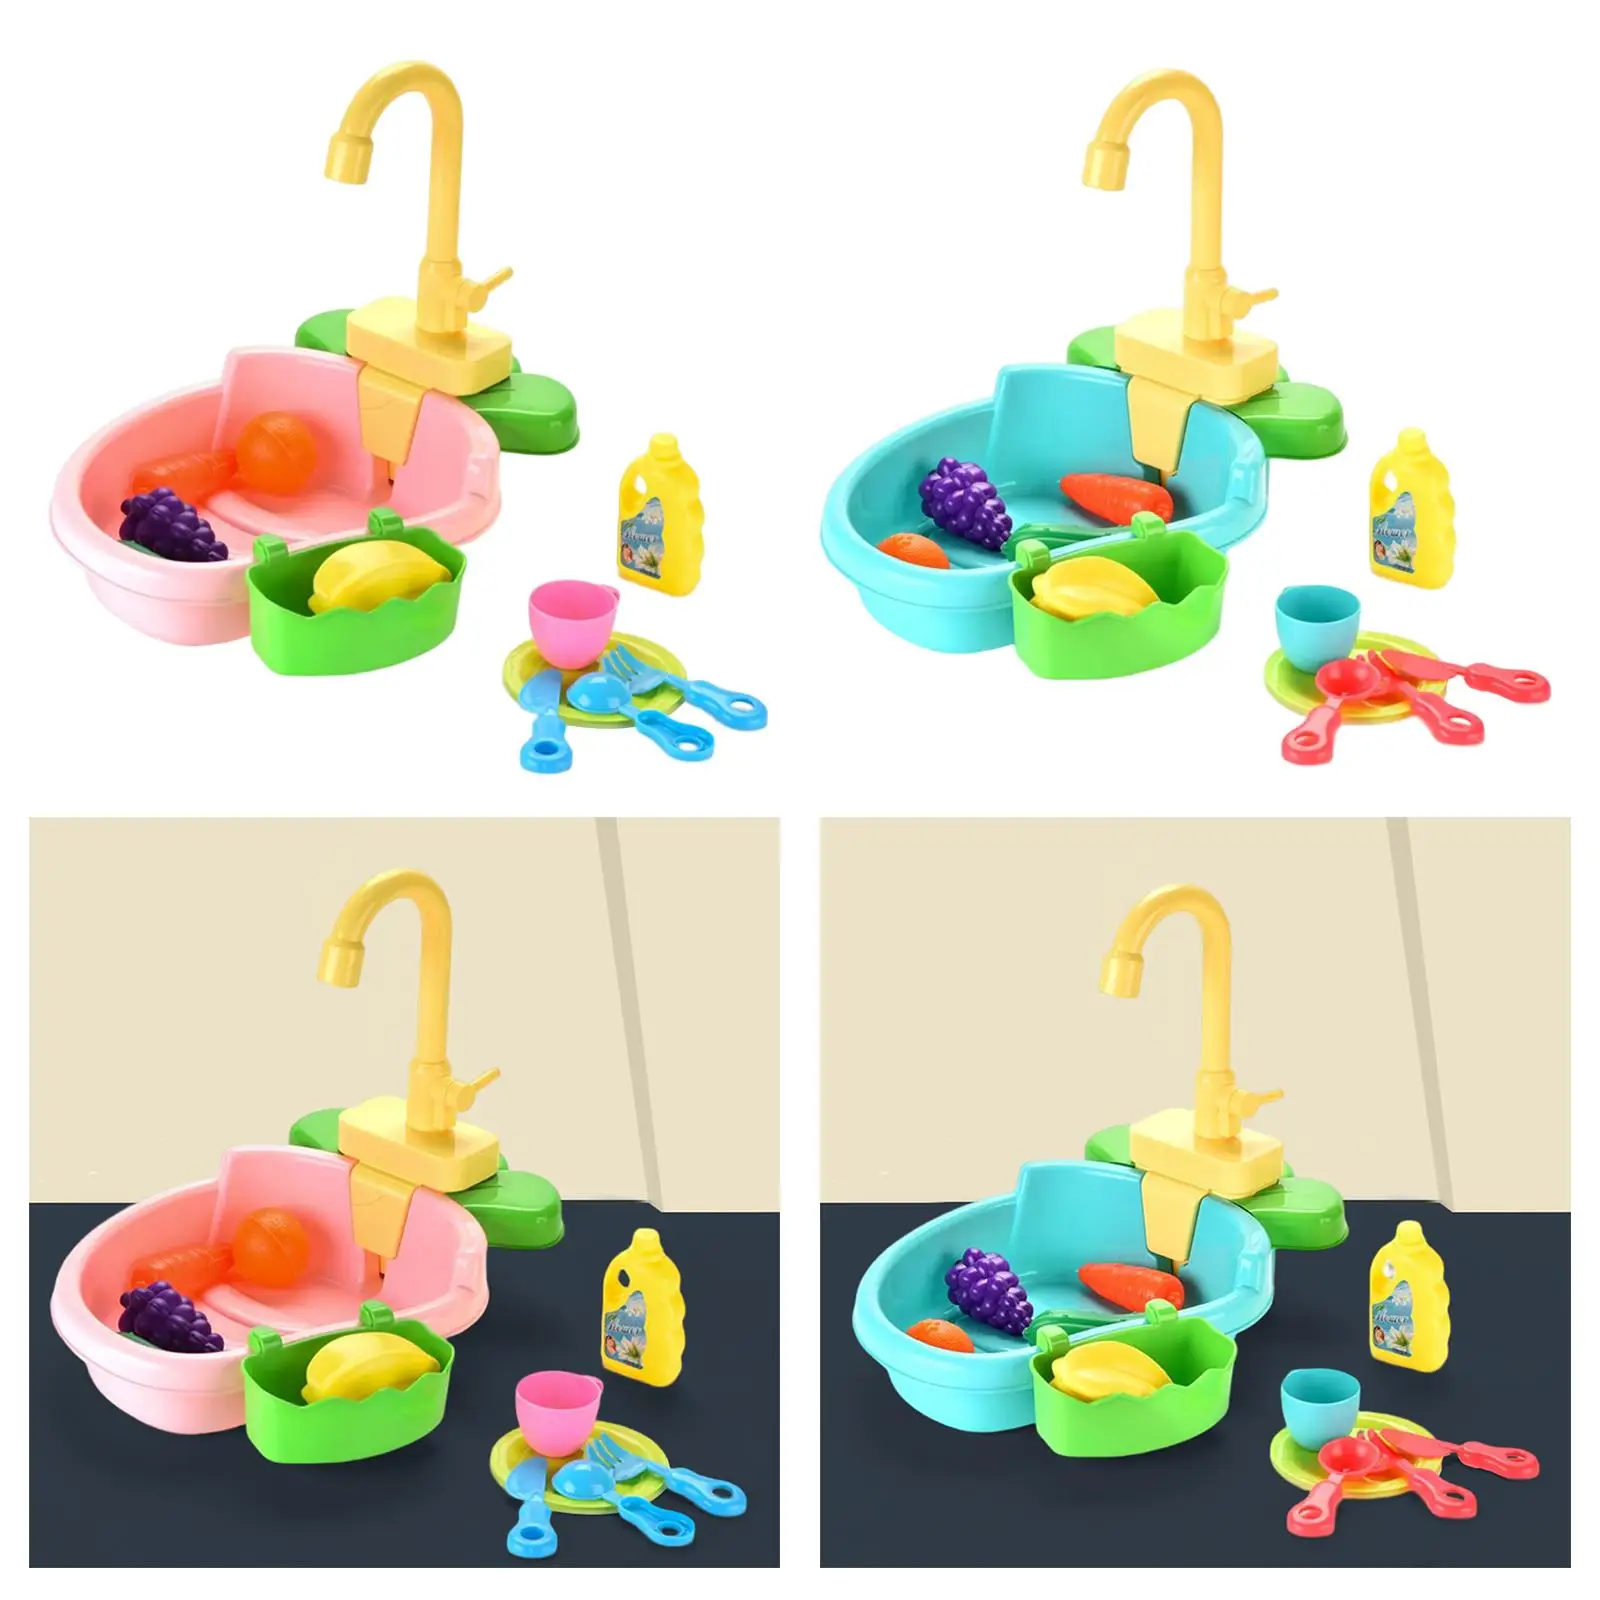 Children Play Sink Role Play Set Automatic Faucet and Accessories Electric dishwash Playing Toy Bird Baths Tub for Parrots